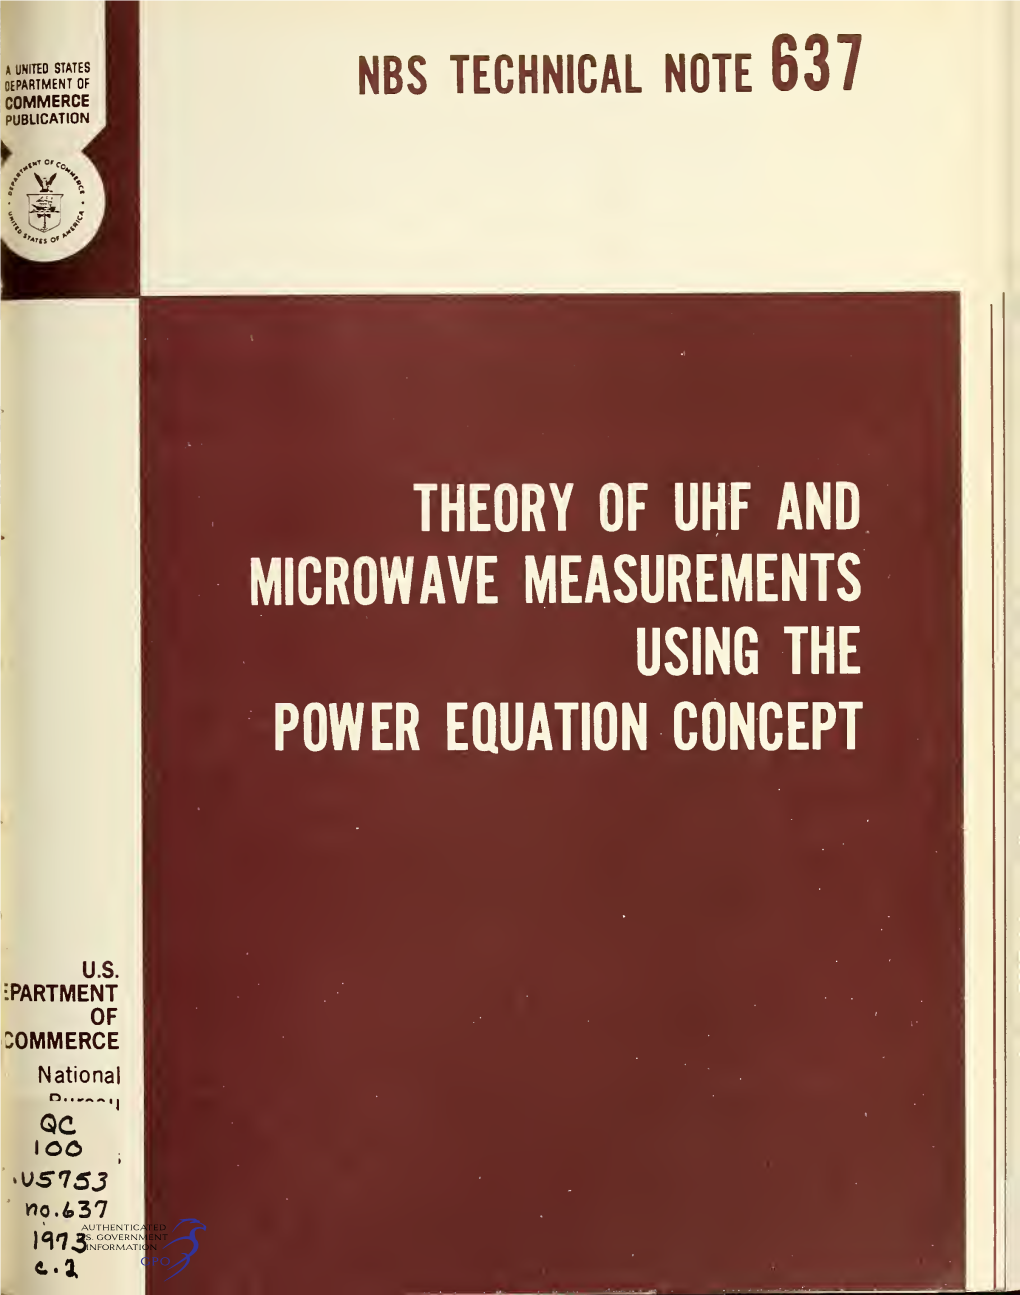 Theory of Uhf and Microwave Measurements Using the Power Equation Concept